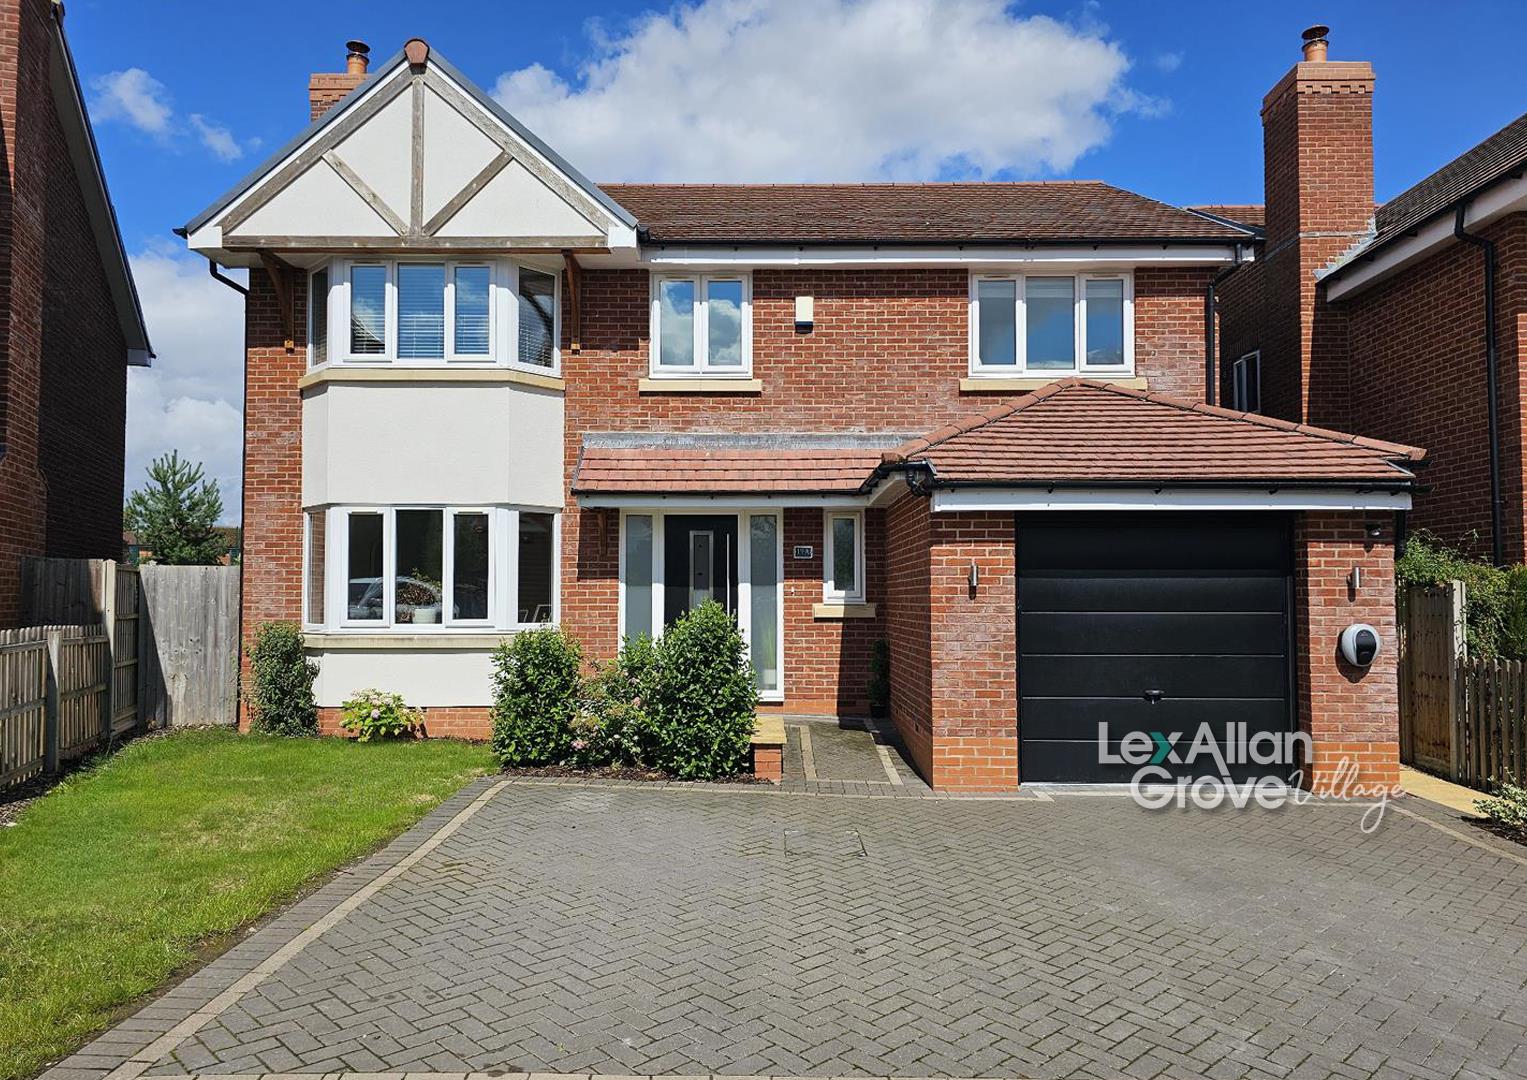 4 bed detached house for sale  - Property Image 1